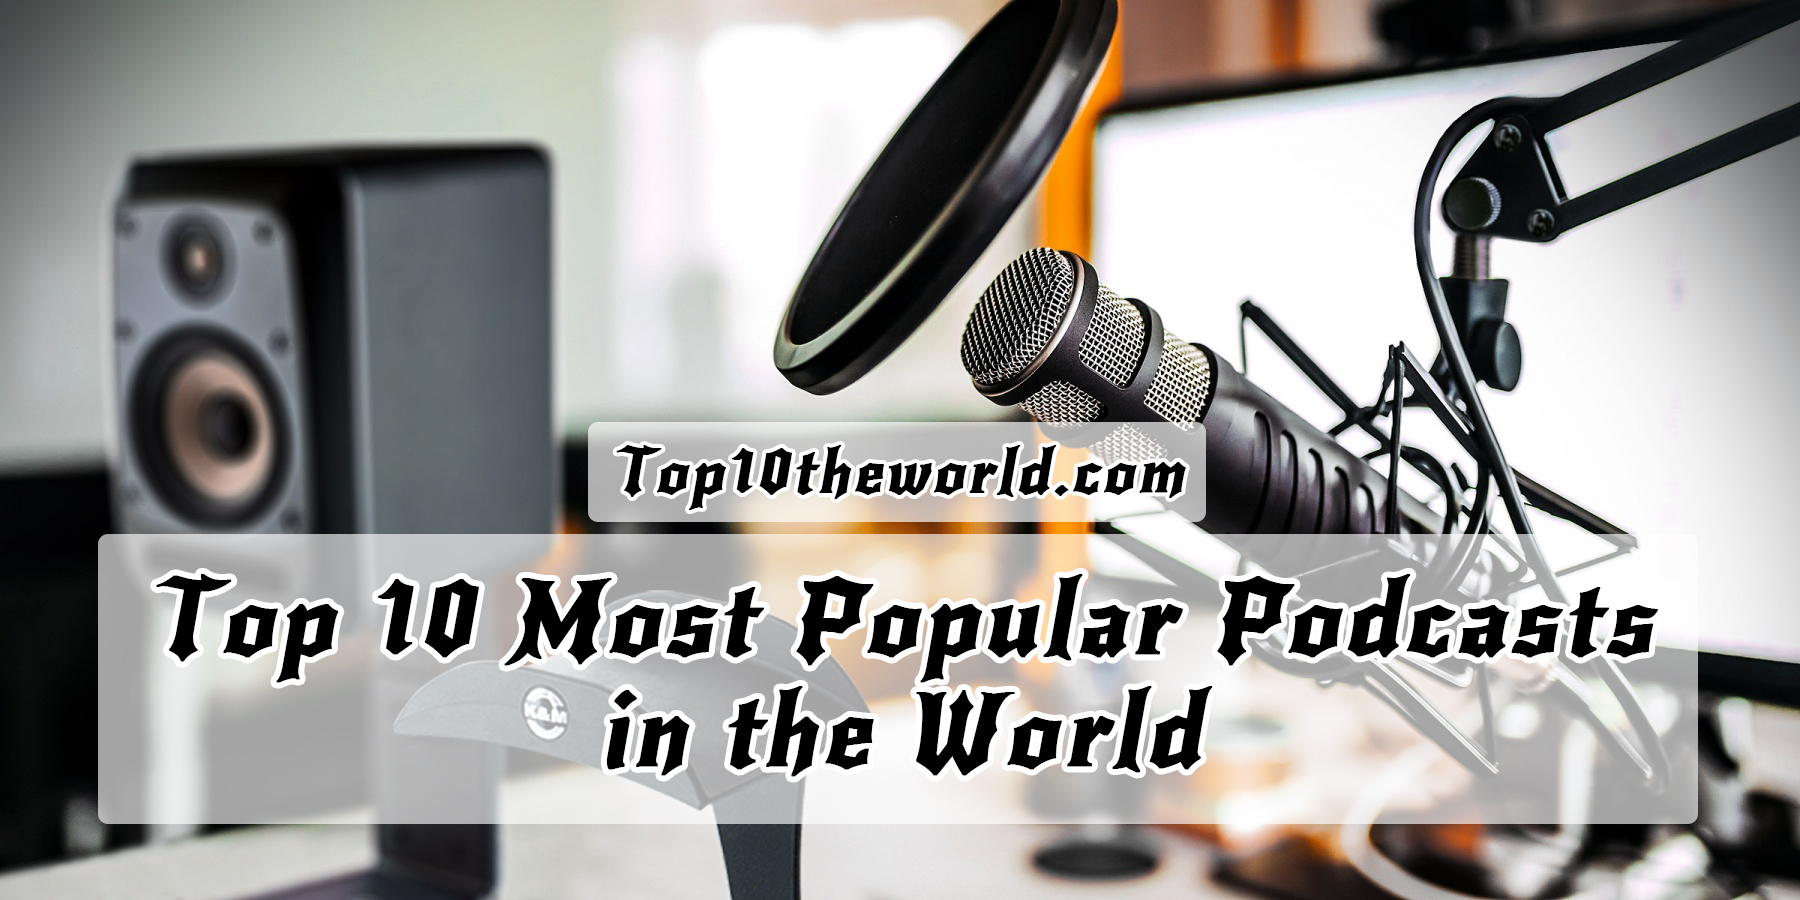 Top 10 Most Popular Podcasts in the World